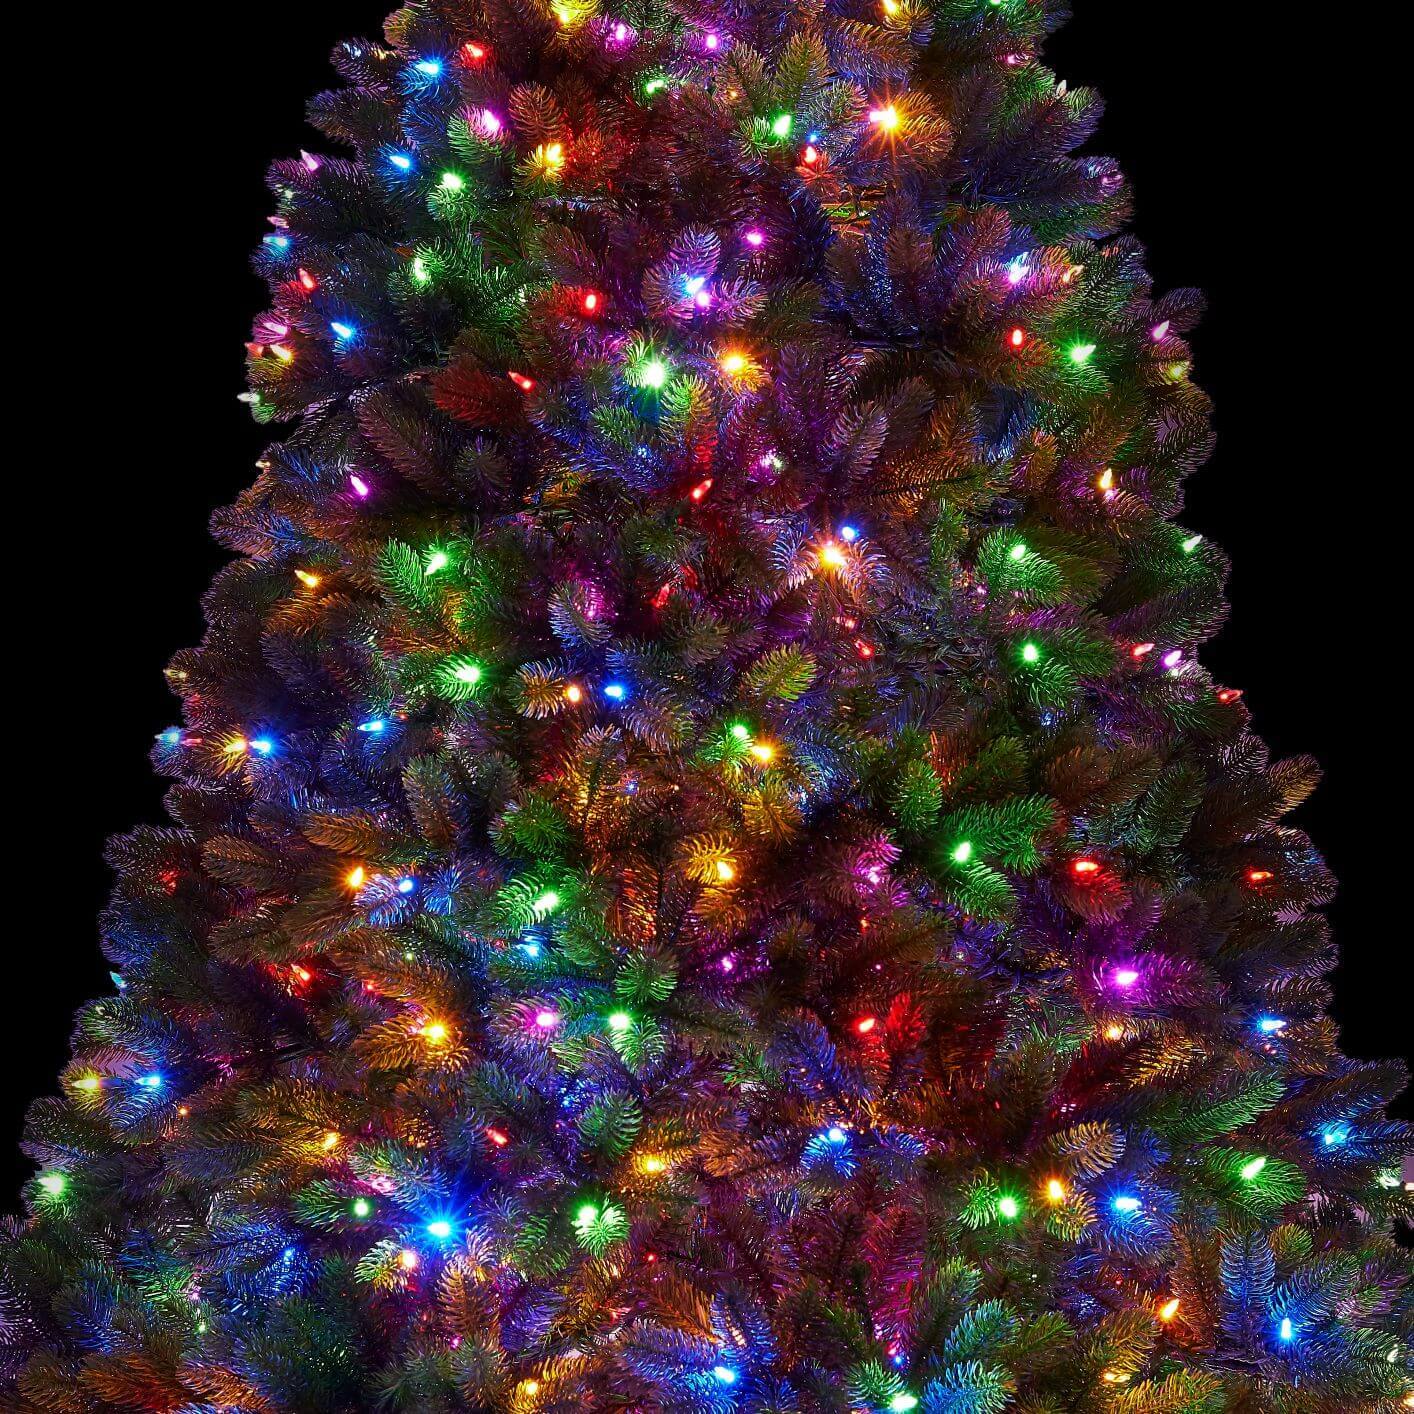 King of Christmas 7.5' Royal Fir Quick-Shape Artificial Christmas Tree with 1000 Warm White & Multi-Color LED Lights